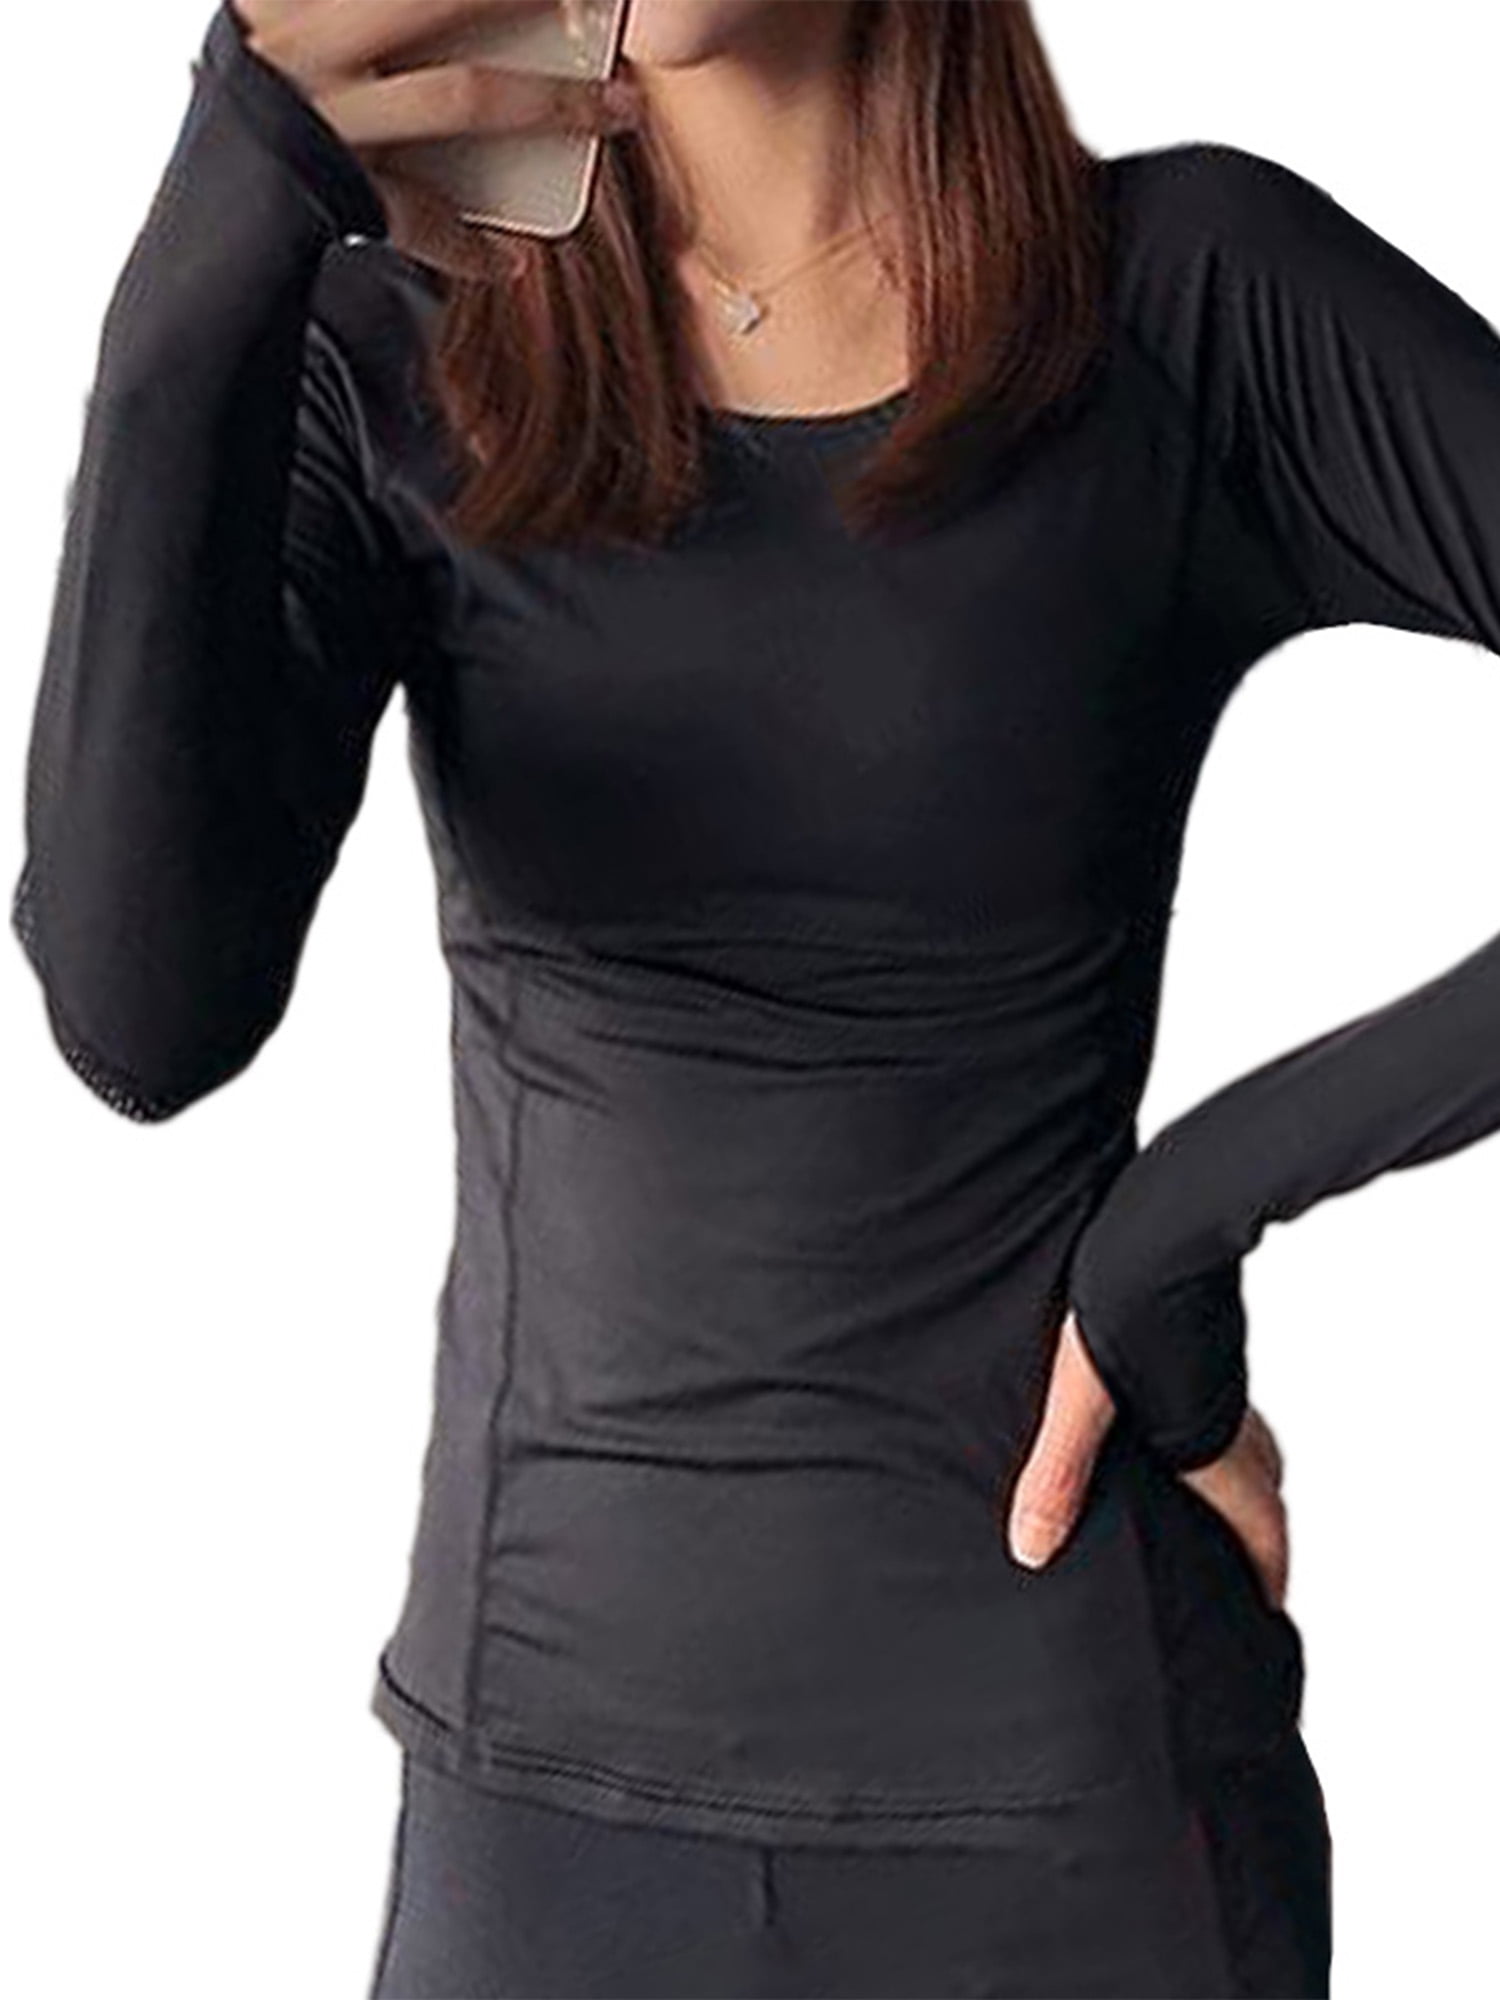 CRZ YOGA Womens Ribbed Slim Fit Athletic Shirt Long Sleeves Sports Workout Tops with Thumbholes